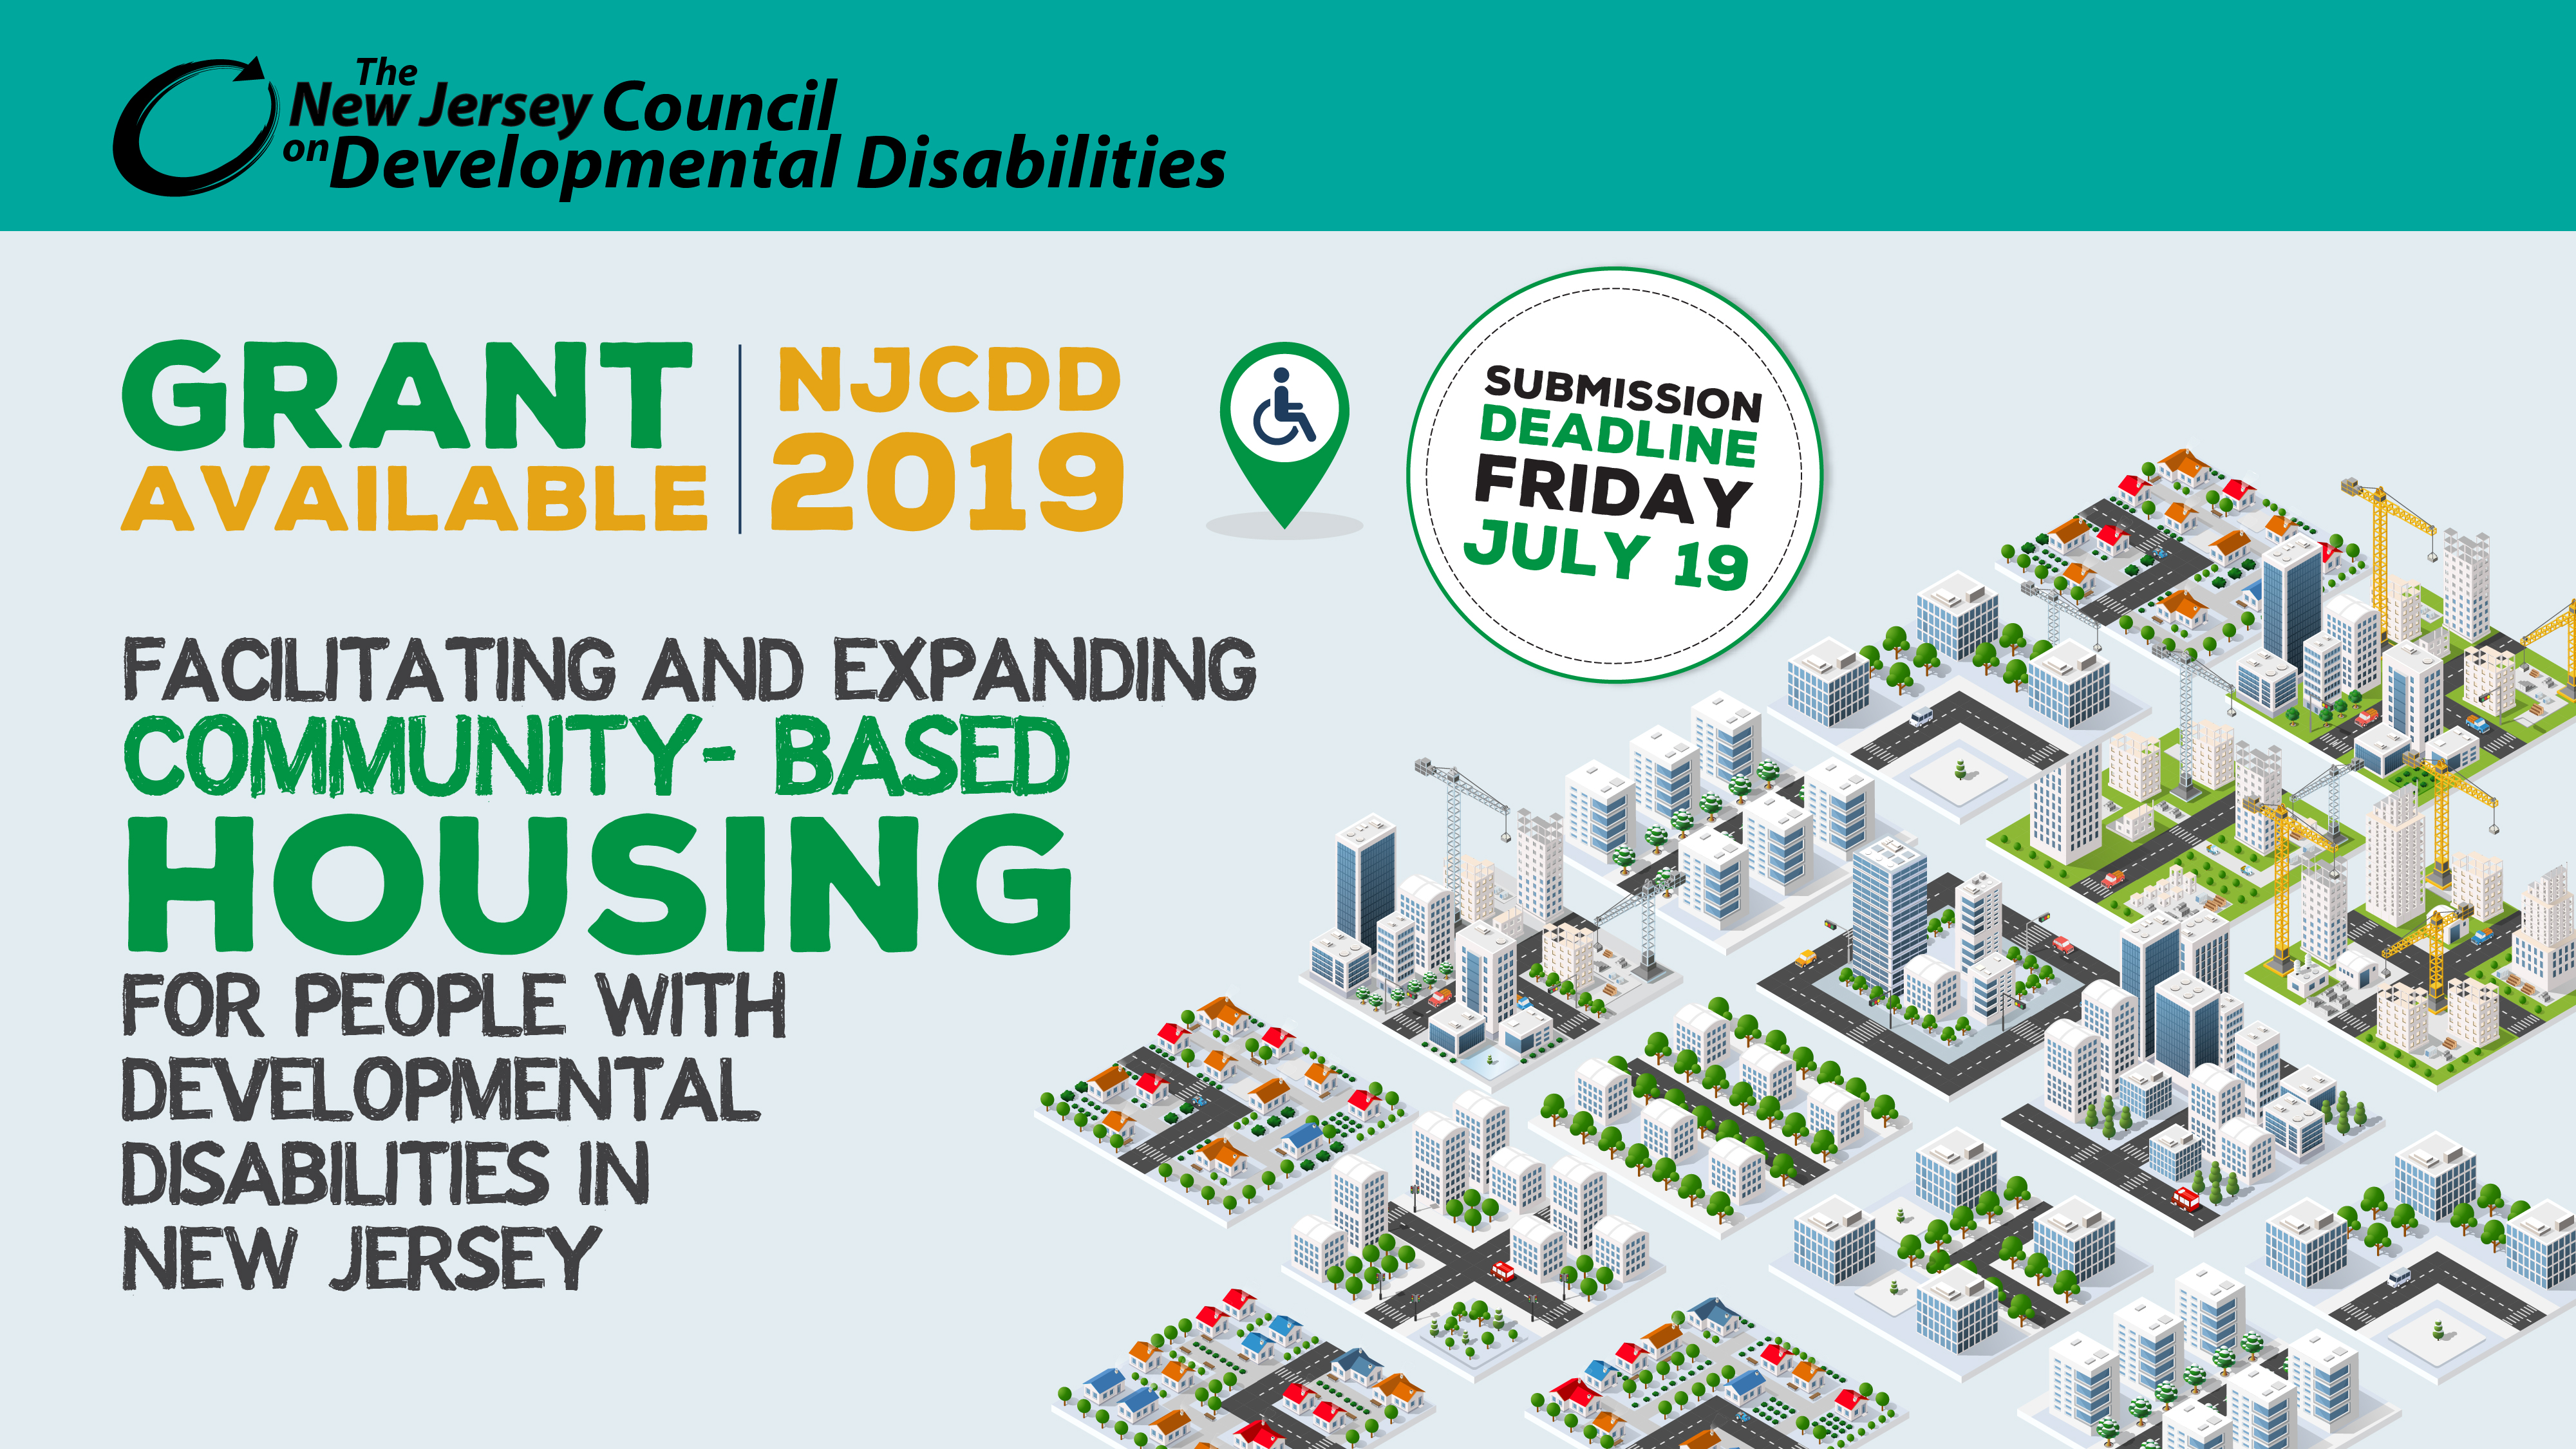 NJCDD Grant Available NJCDD 2019 Facilitating and expanding housing for individuals with developmental disabilities in New Jersey Submission Deadline Friday, July 19